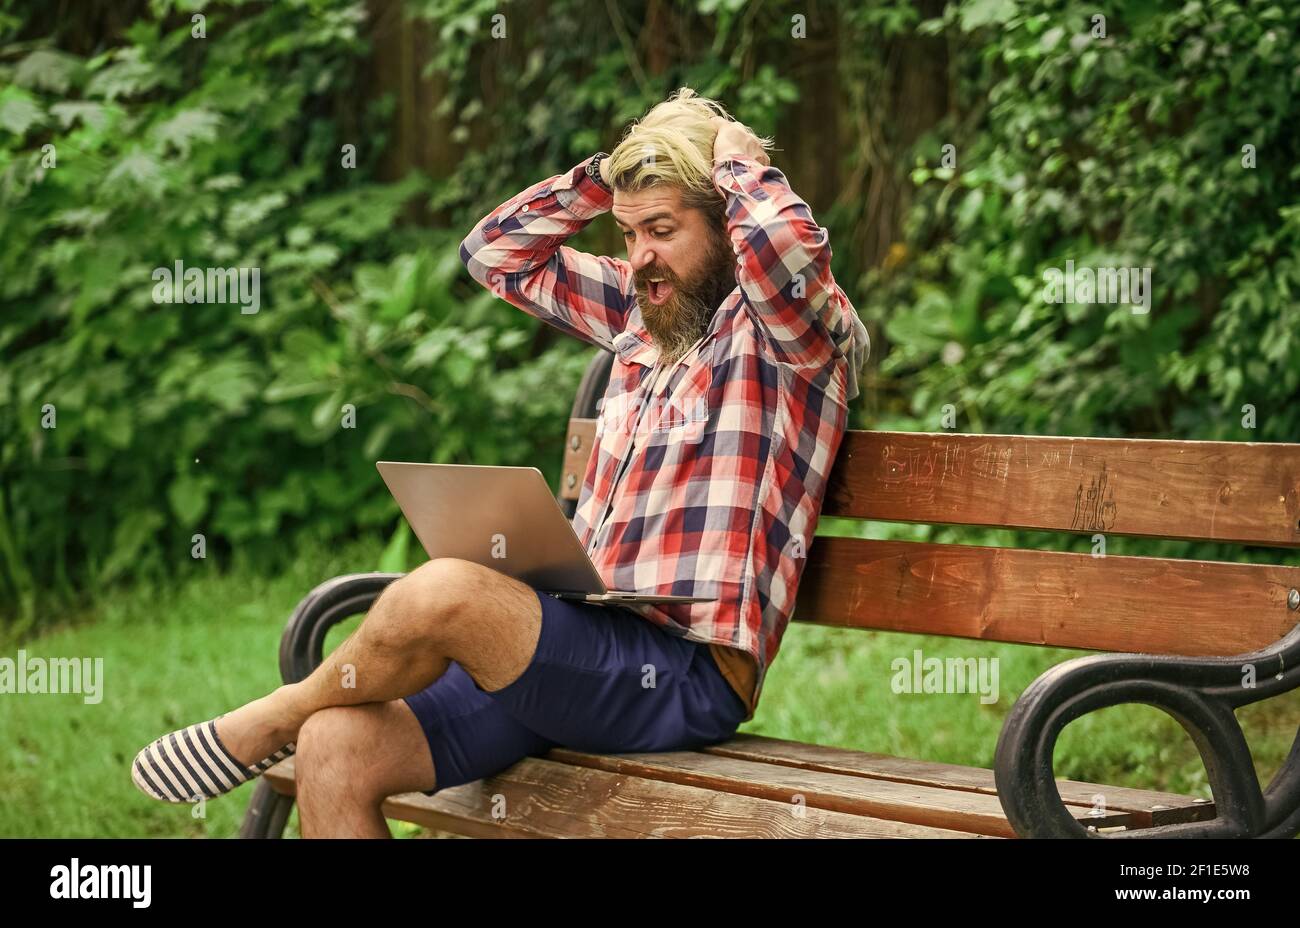 Fresh air. Mobile internet. Online shopping. Agile business. Bearded guy sit bench park nature background. Work and relax. Working online. Hipster inspired work in park. Modern laptop. Remote job. Stock Photo